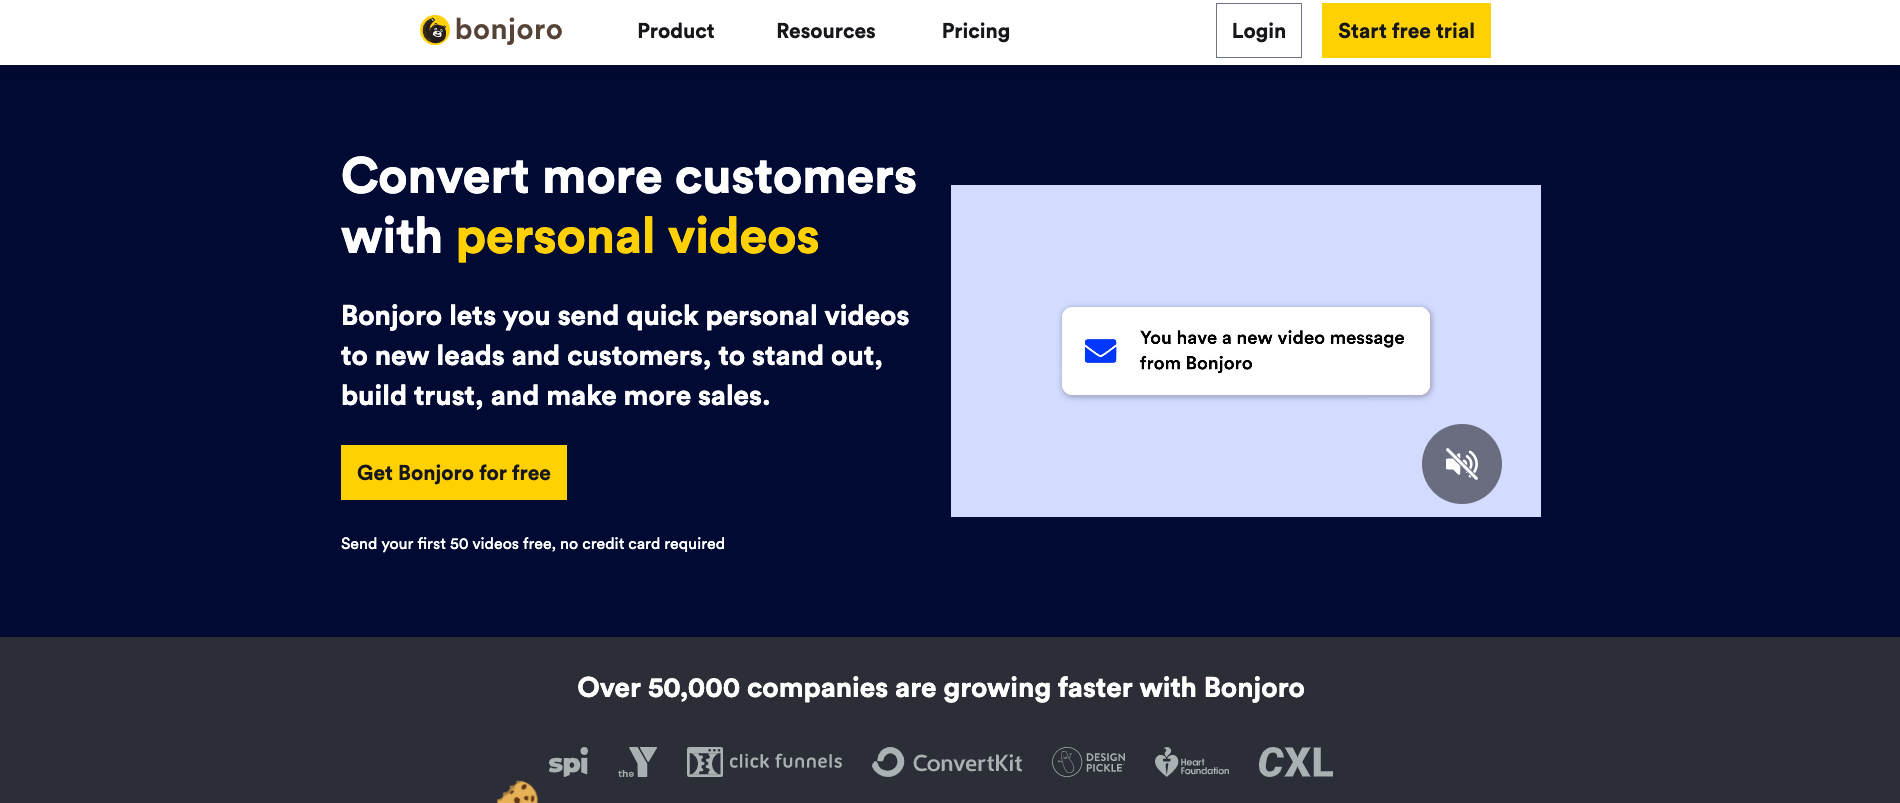 Bonjoro homepage: Convert more customers with personal videos